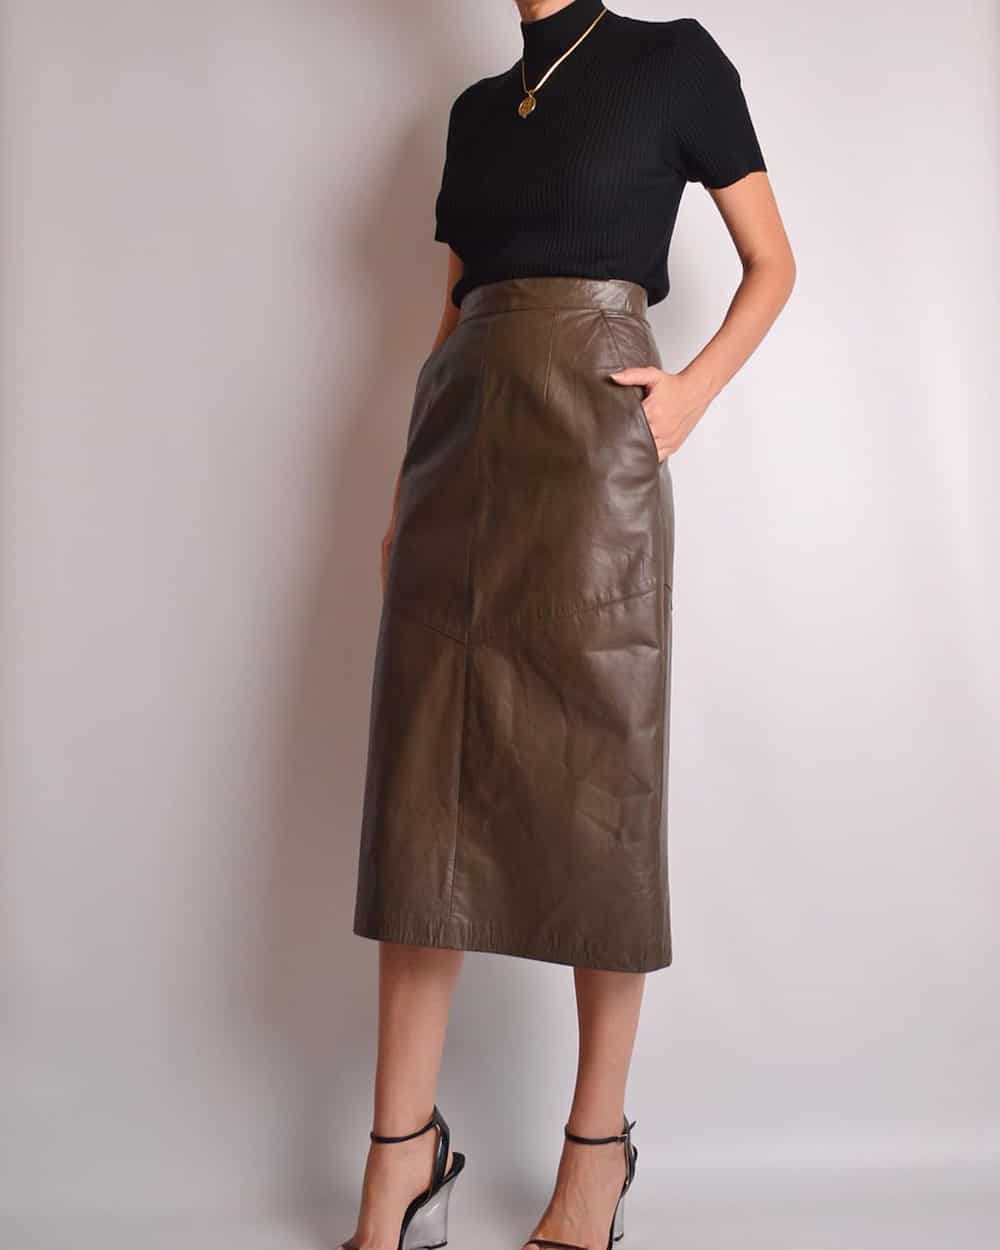 vintage outfit for women skirt